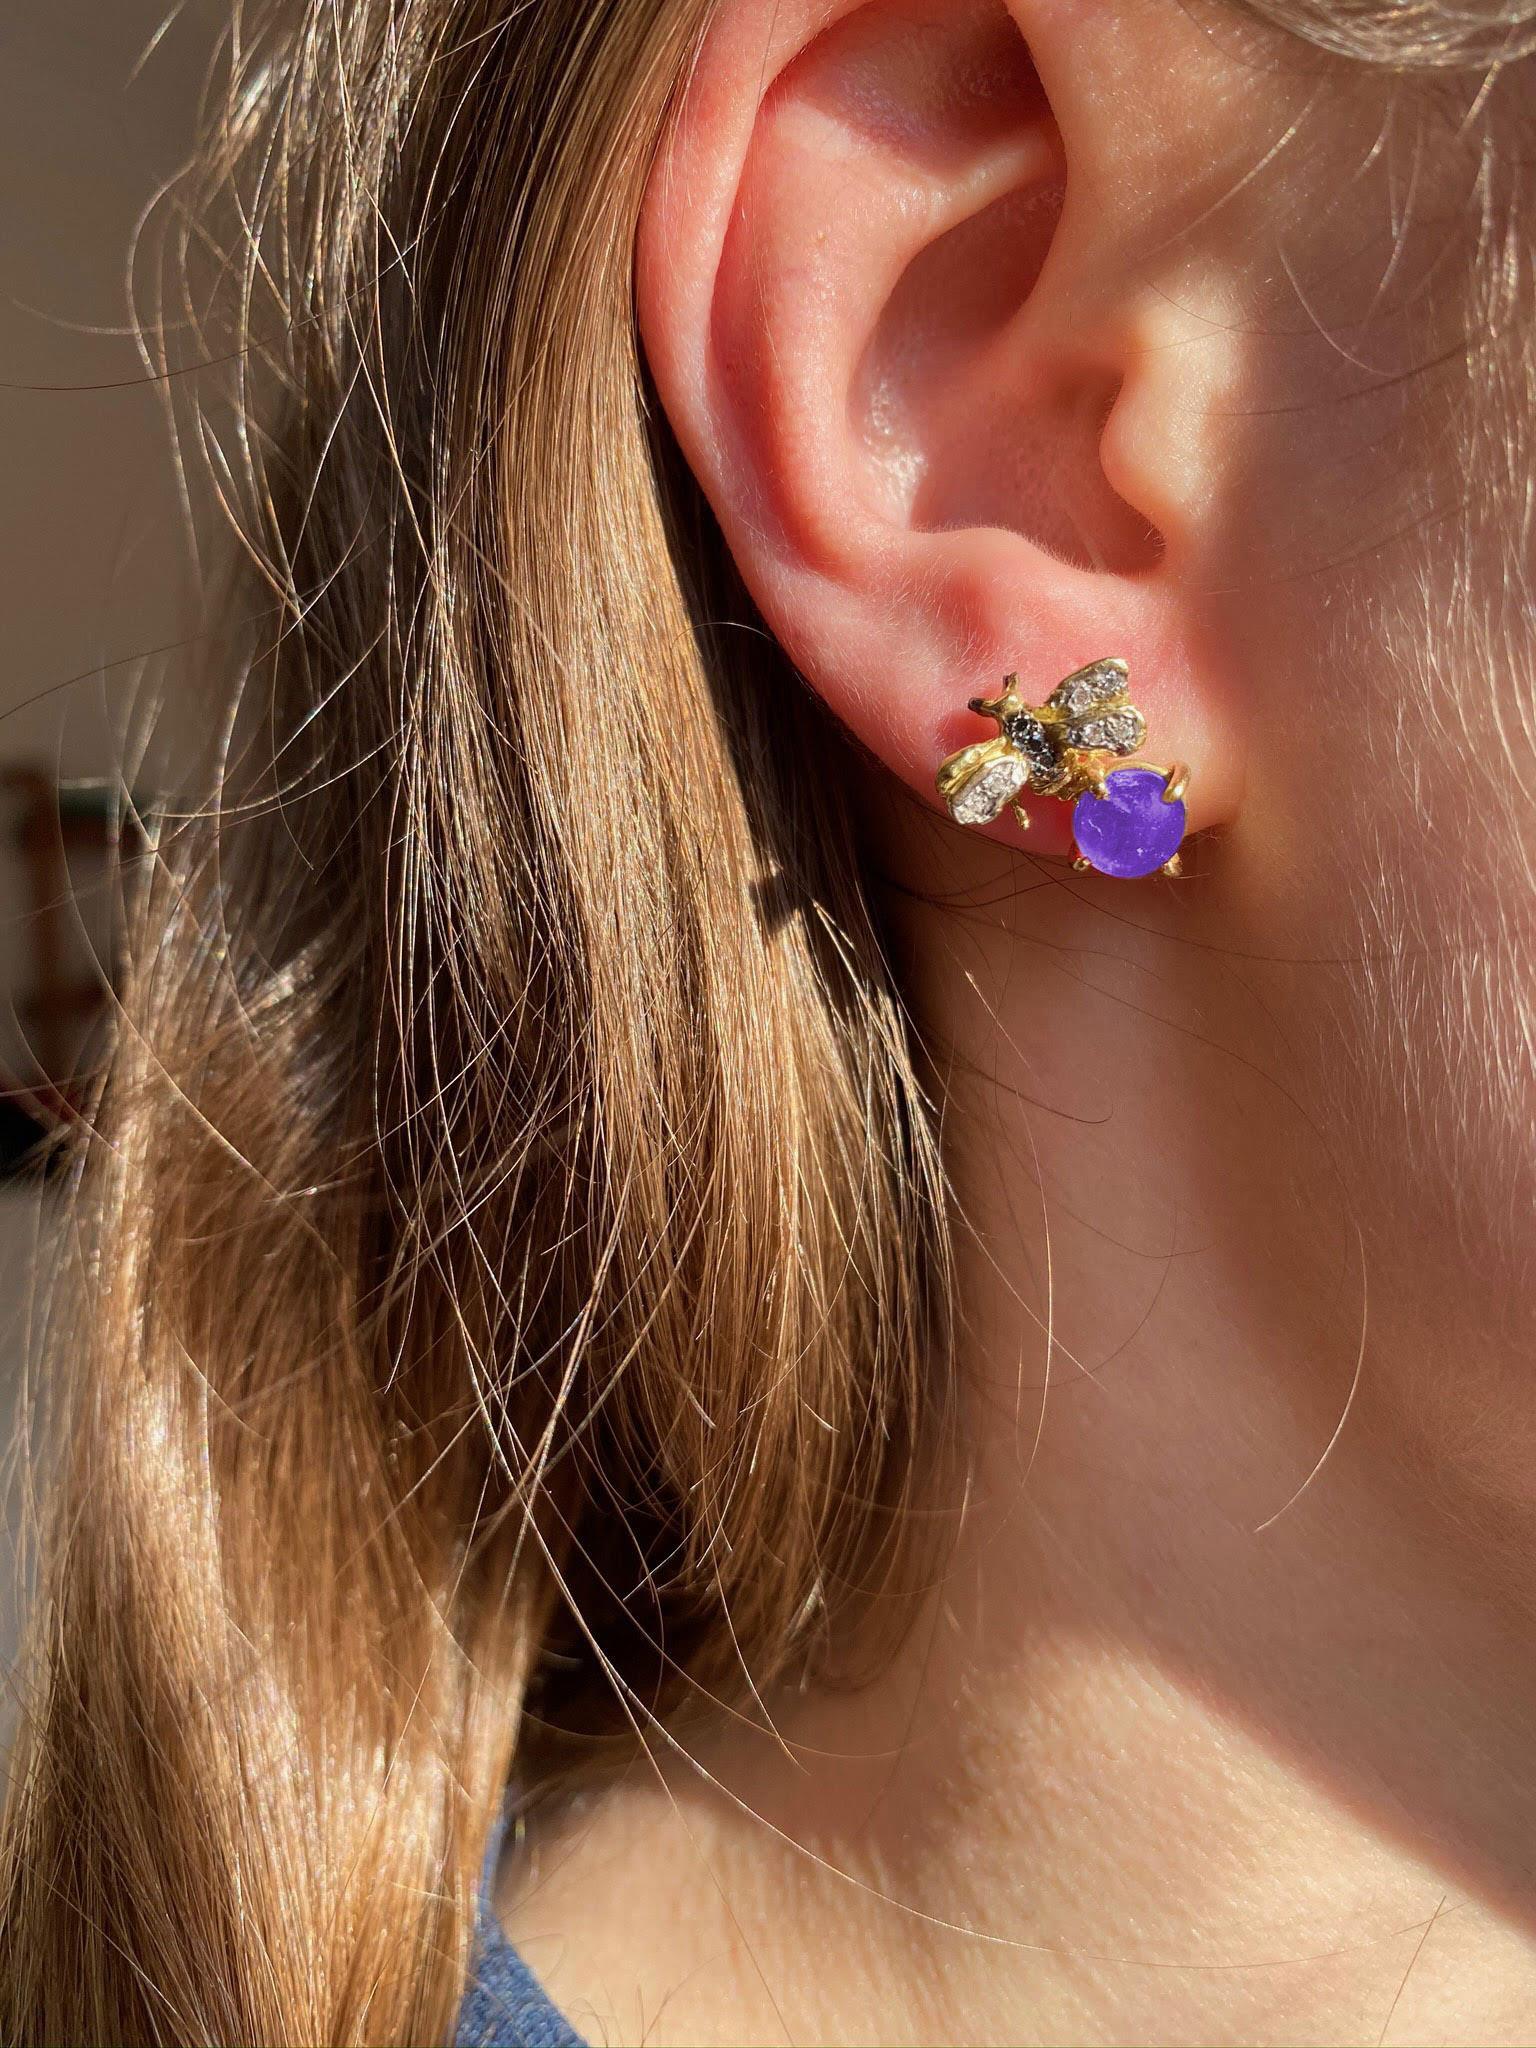 Rossella Ugolini Design Collection, a pair of Little Bees Stud Earrings handcrafted in 18 Karats Yellow Gold and adorned with a beautiful violet amethyst stone, 0.10 carats white diamonds and 0.06 karats deep black diamonds. Dimensions: 0.06 in.